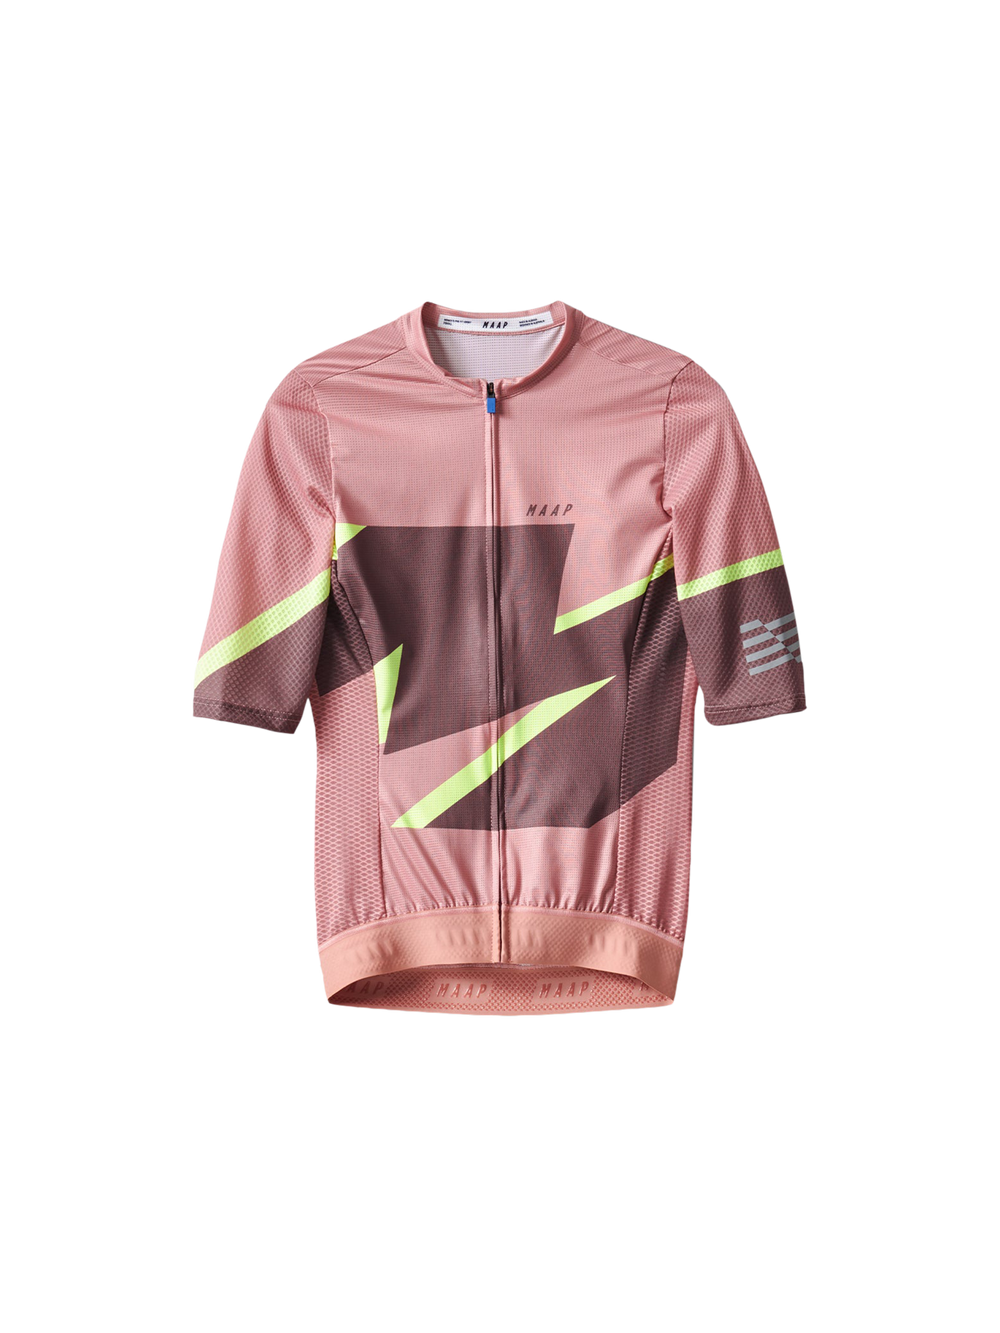 Product Image for Women's Evolve 3D Pro Air Jersey